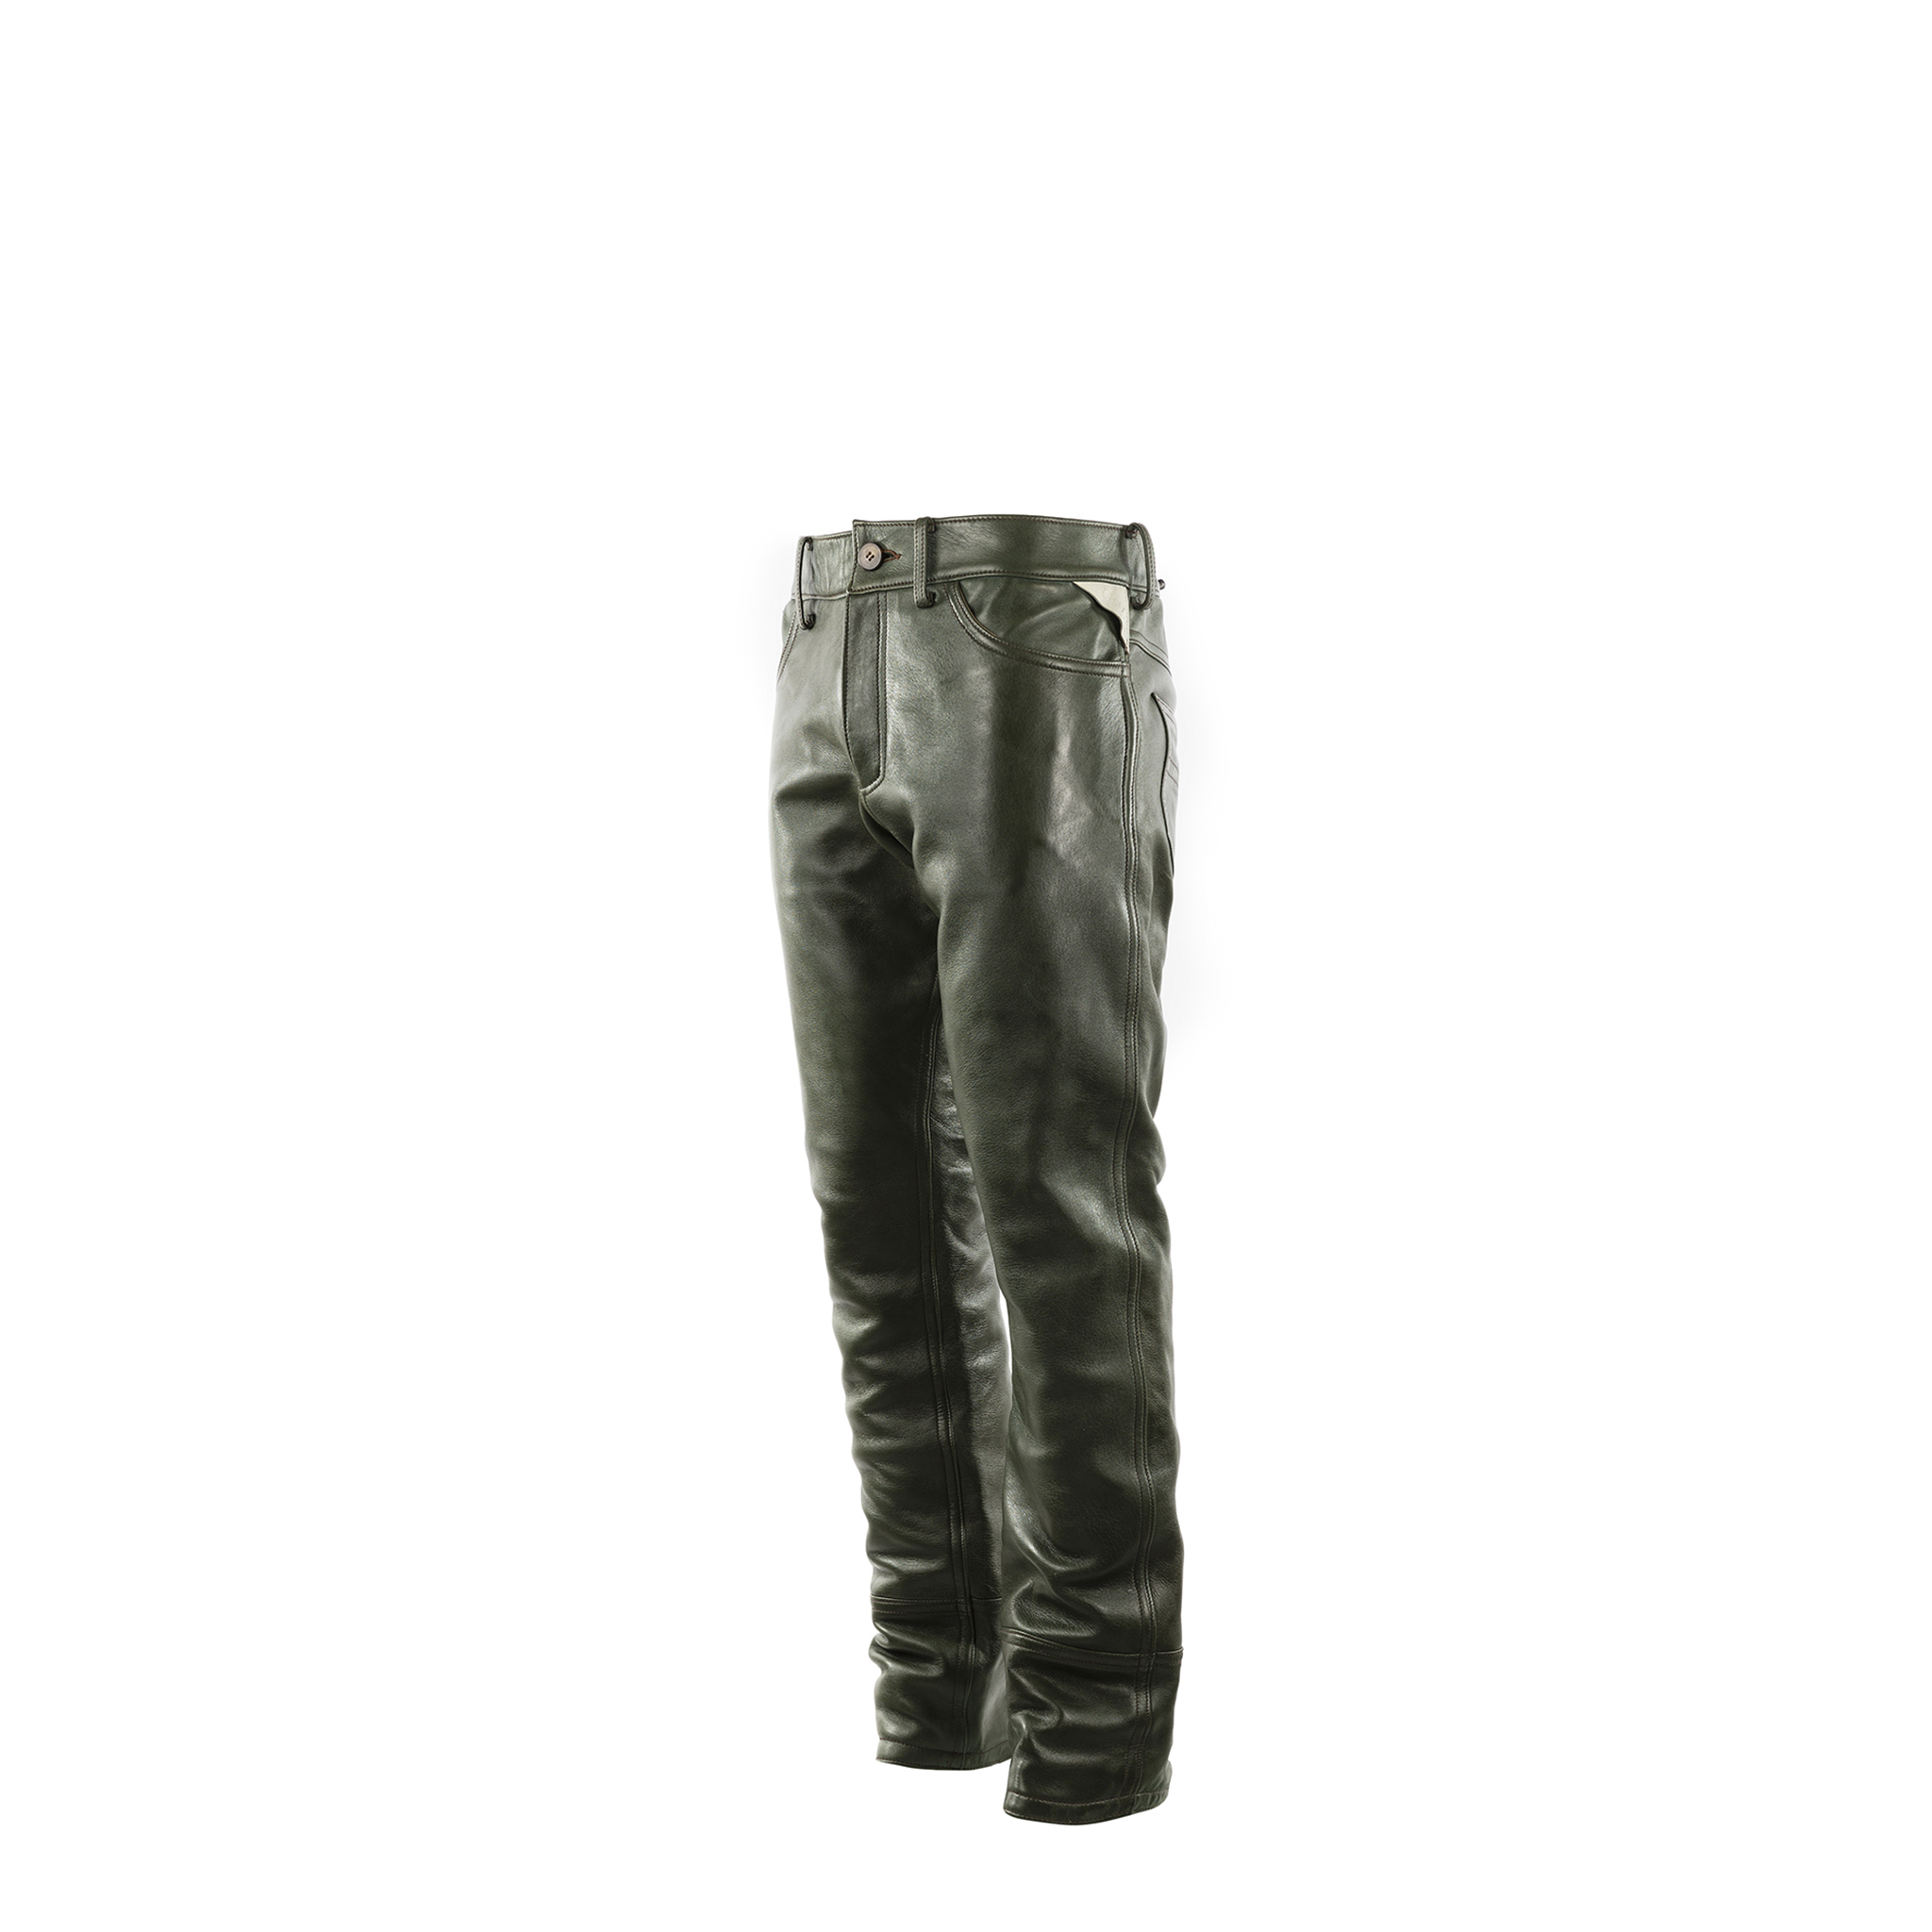 2008 A Pants - Glossy leather - Green color